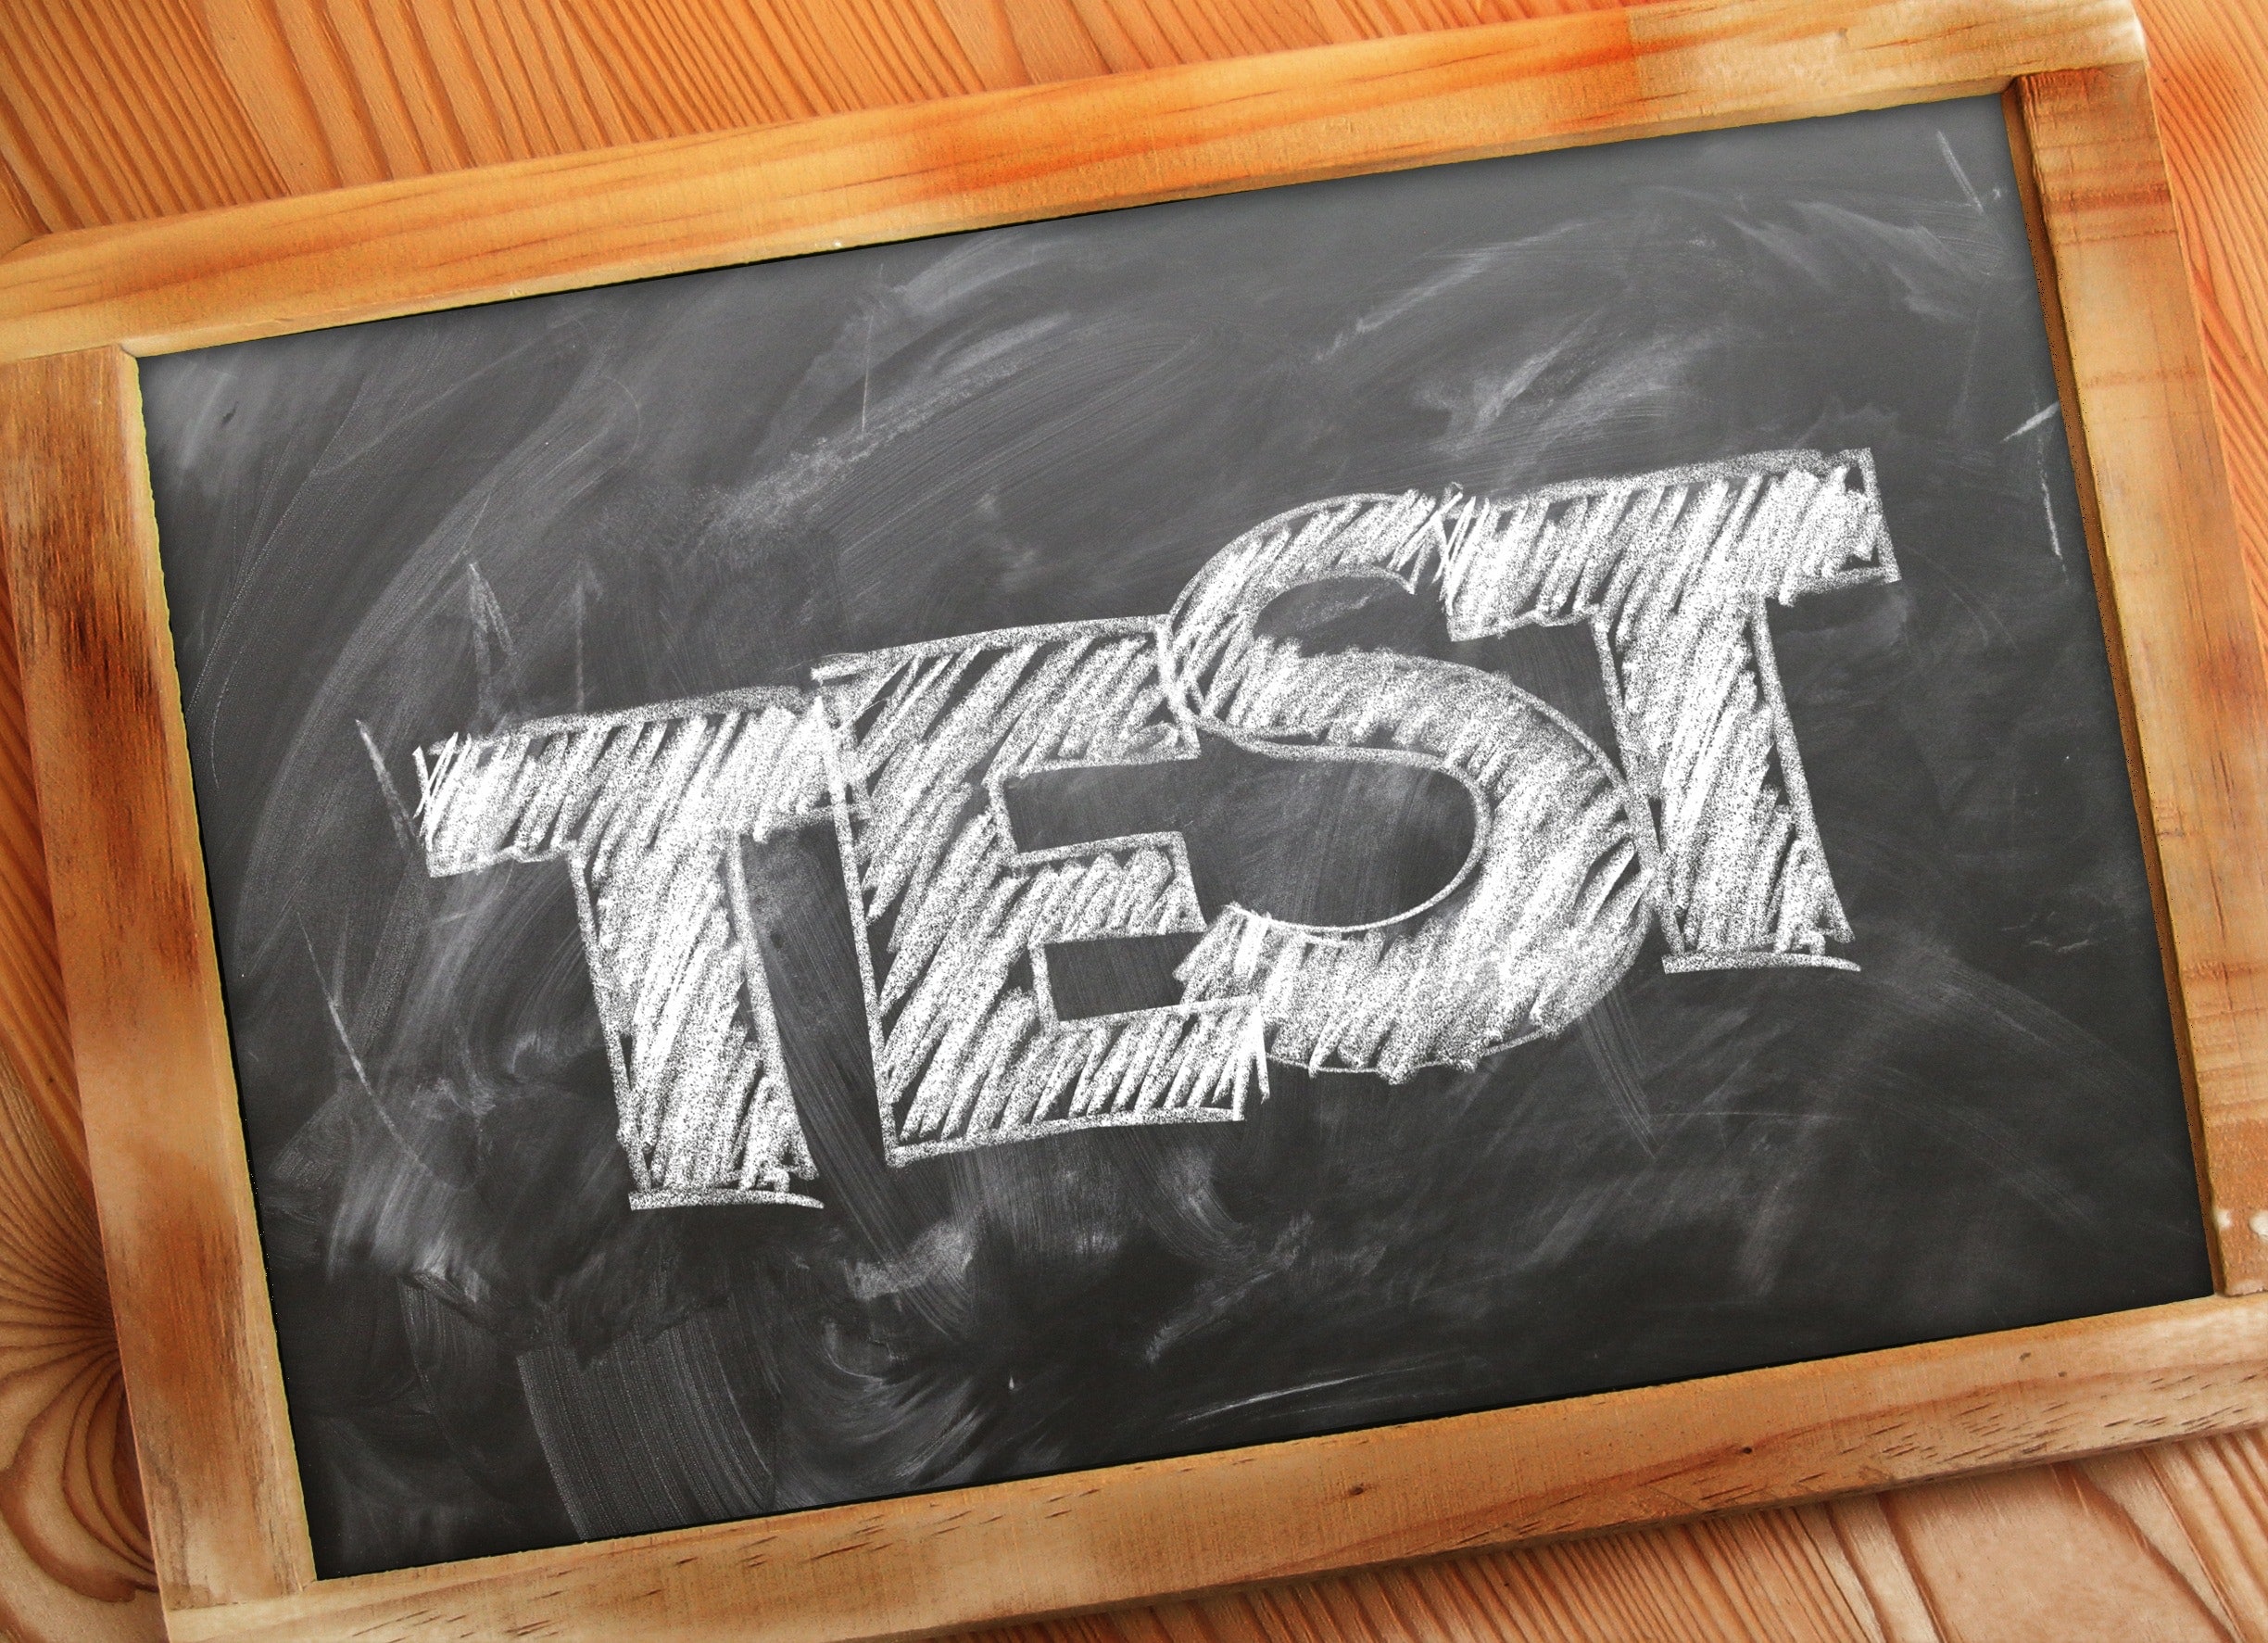 Do you know the importance of early testing in software implementation?